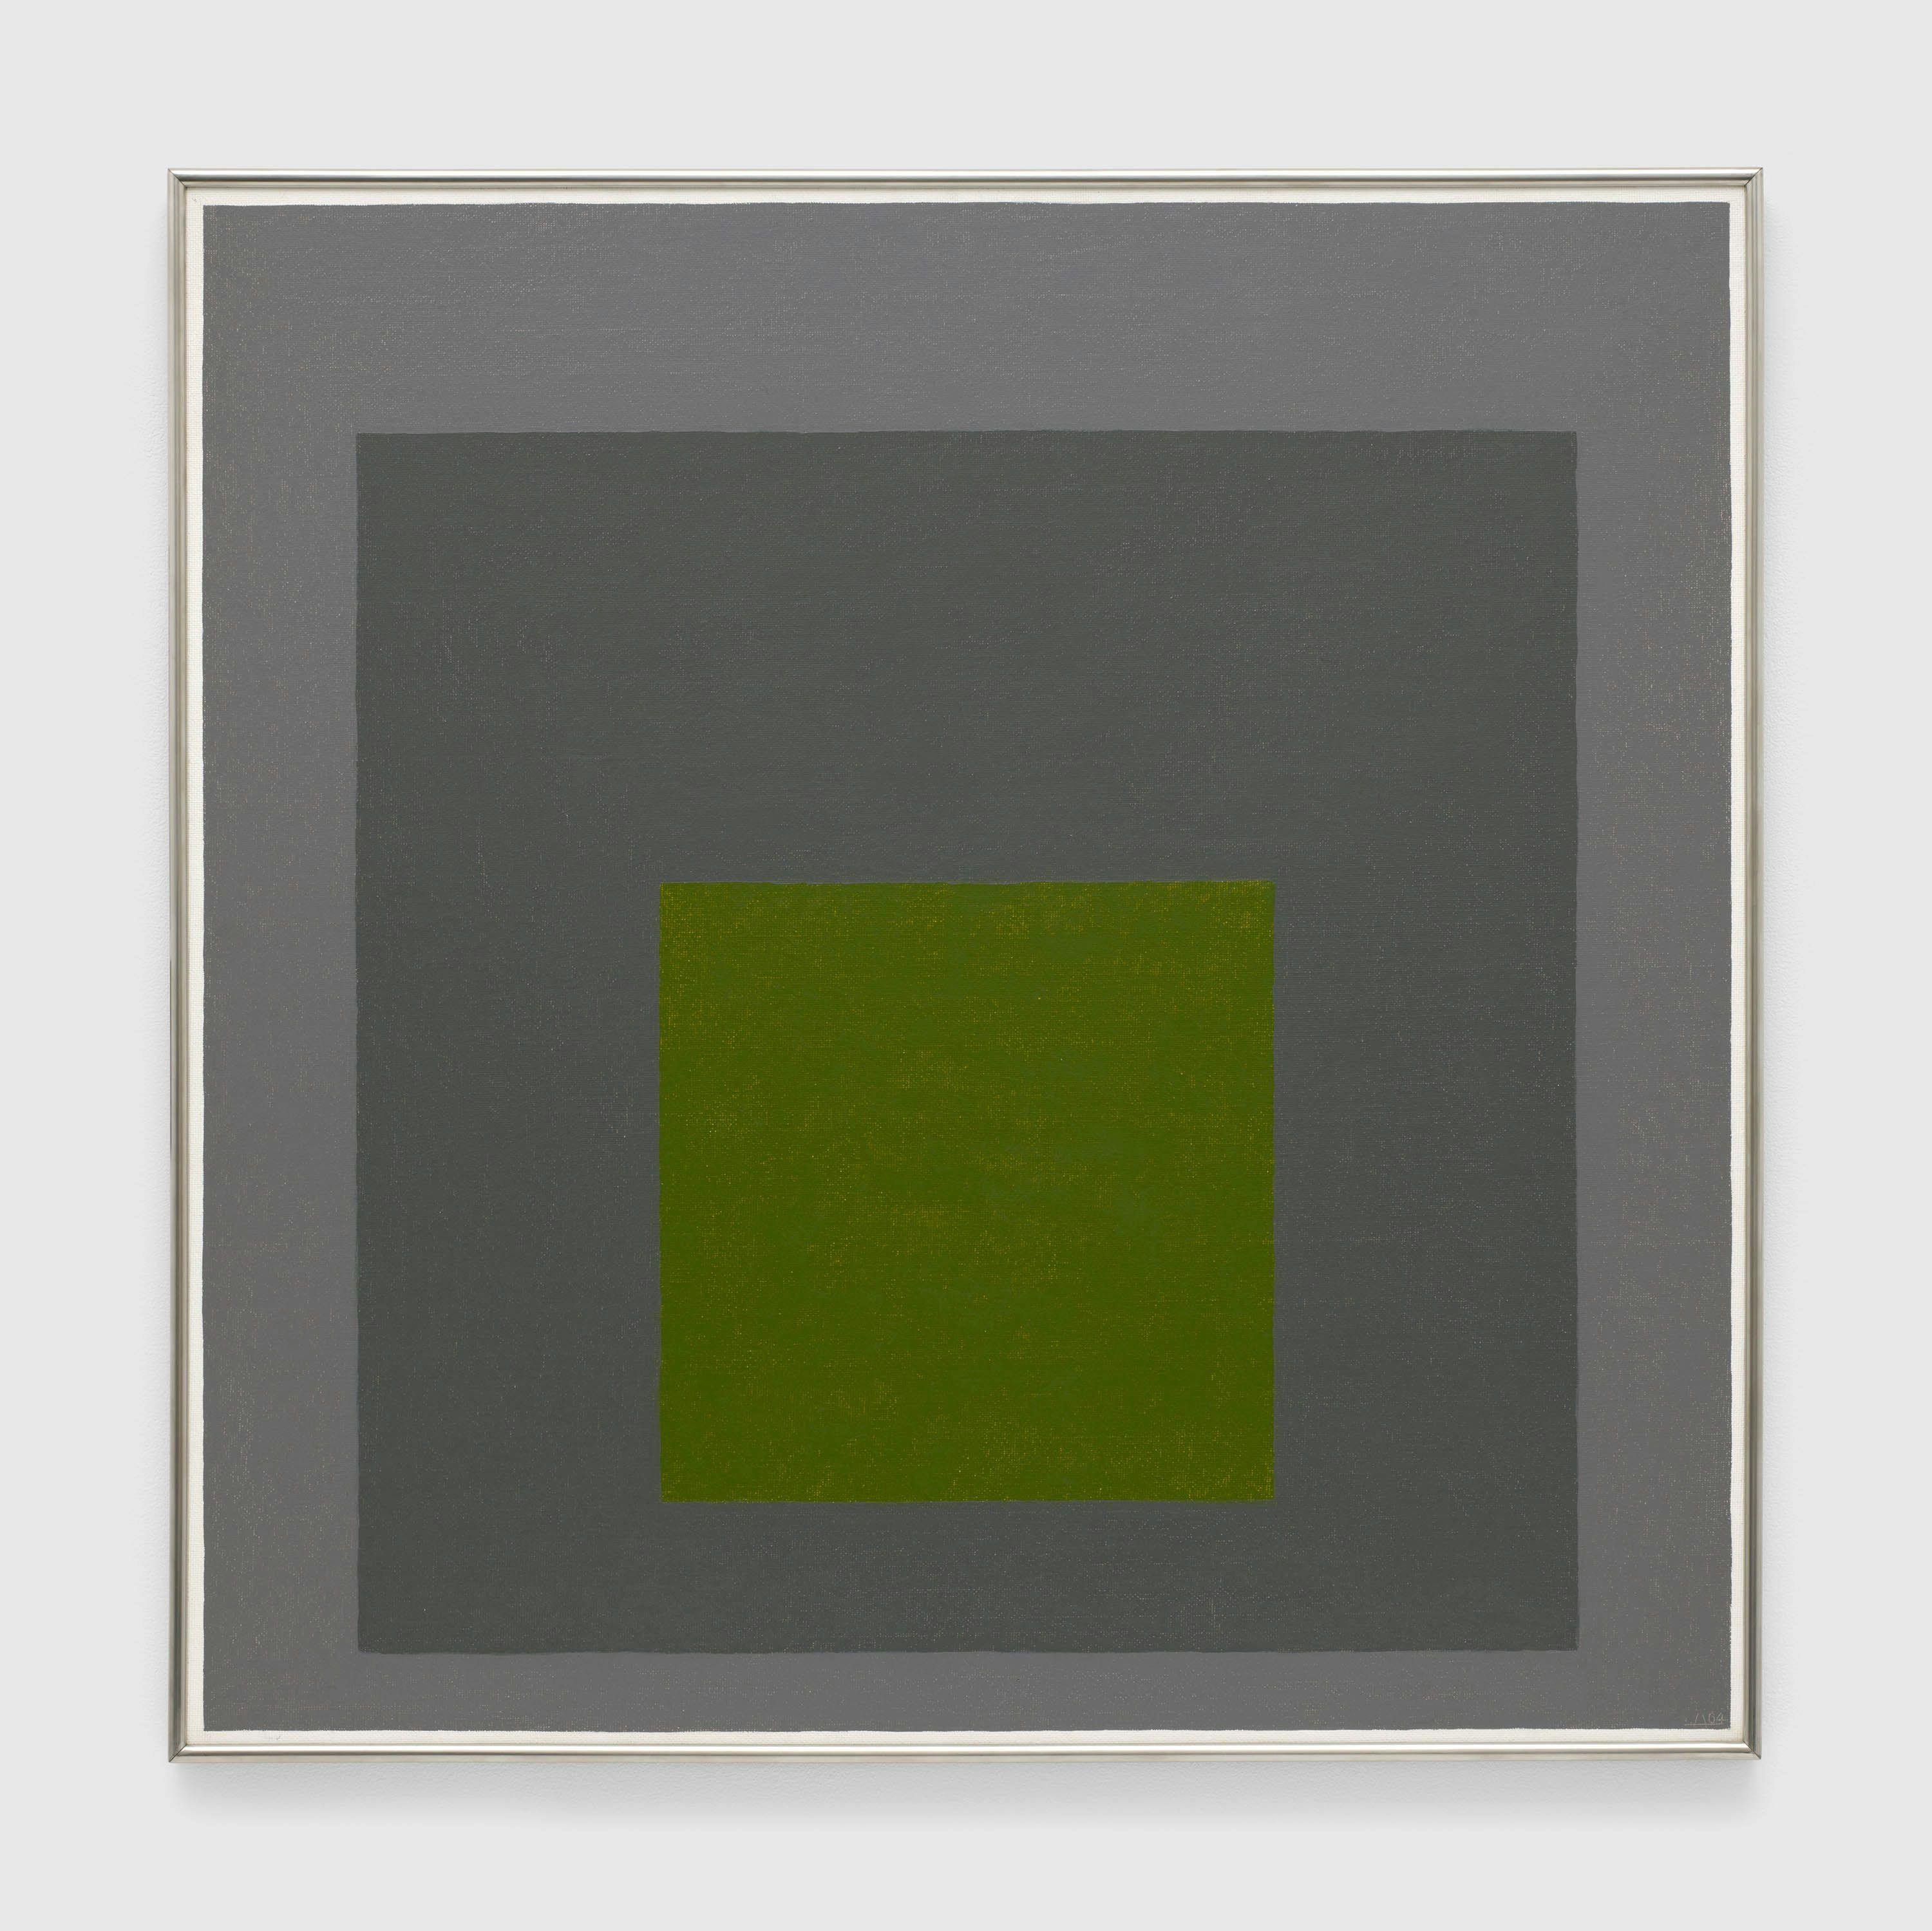 A painting by Josef Albers, titled Study for Homage to the Square: Starting Anew, dated 1964.